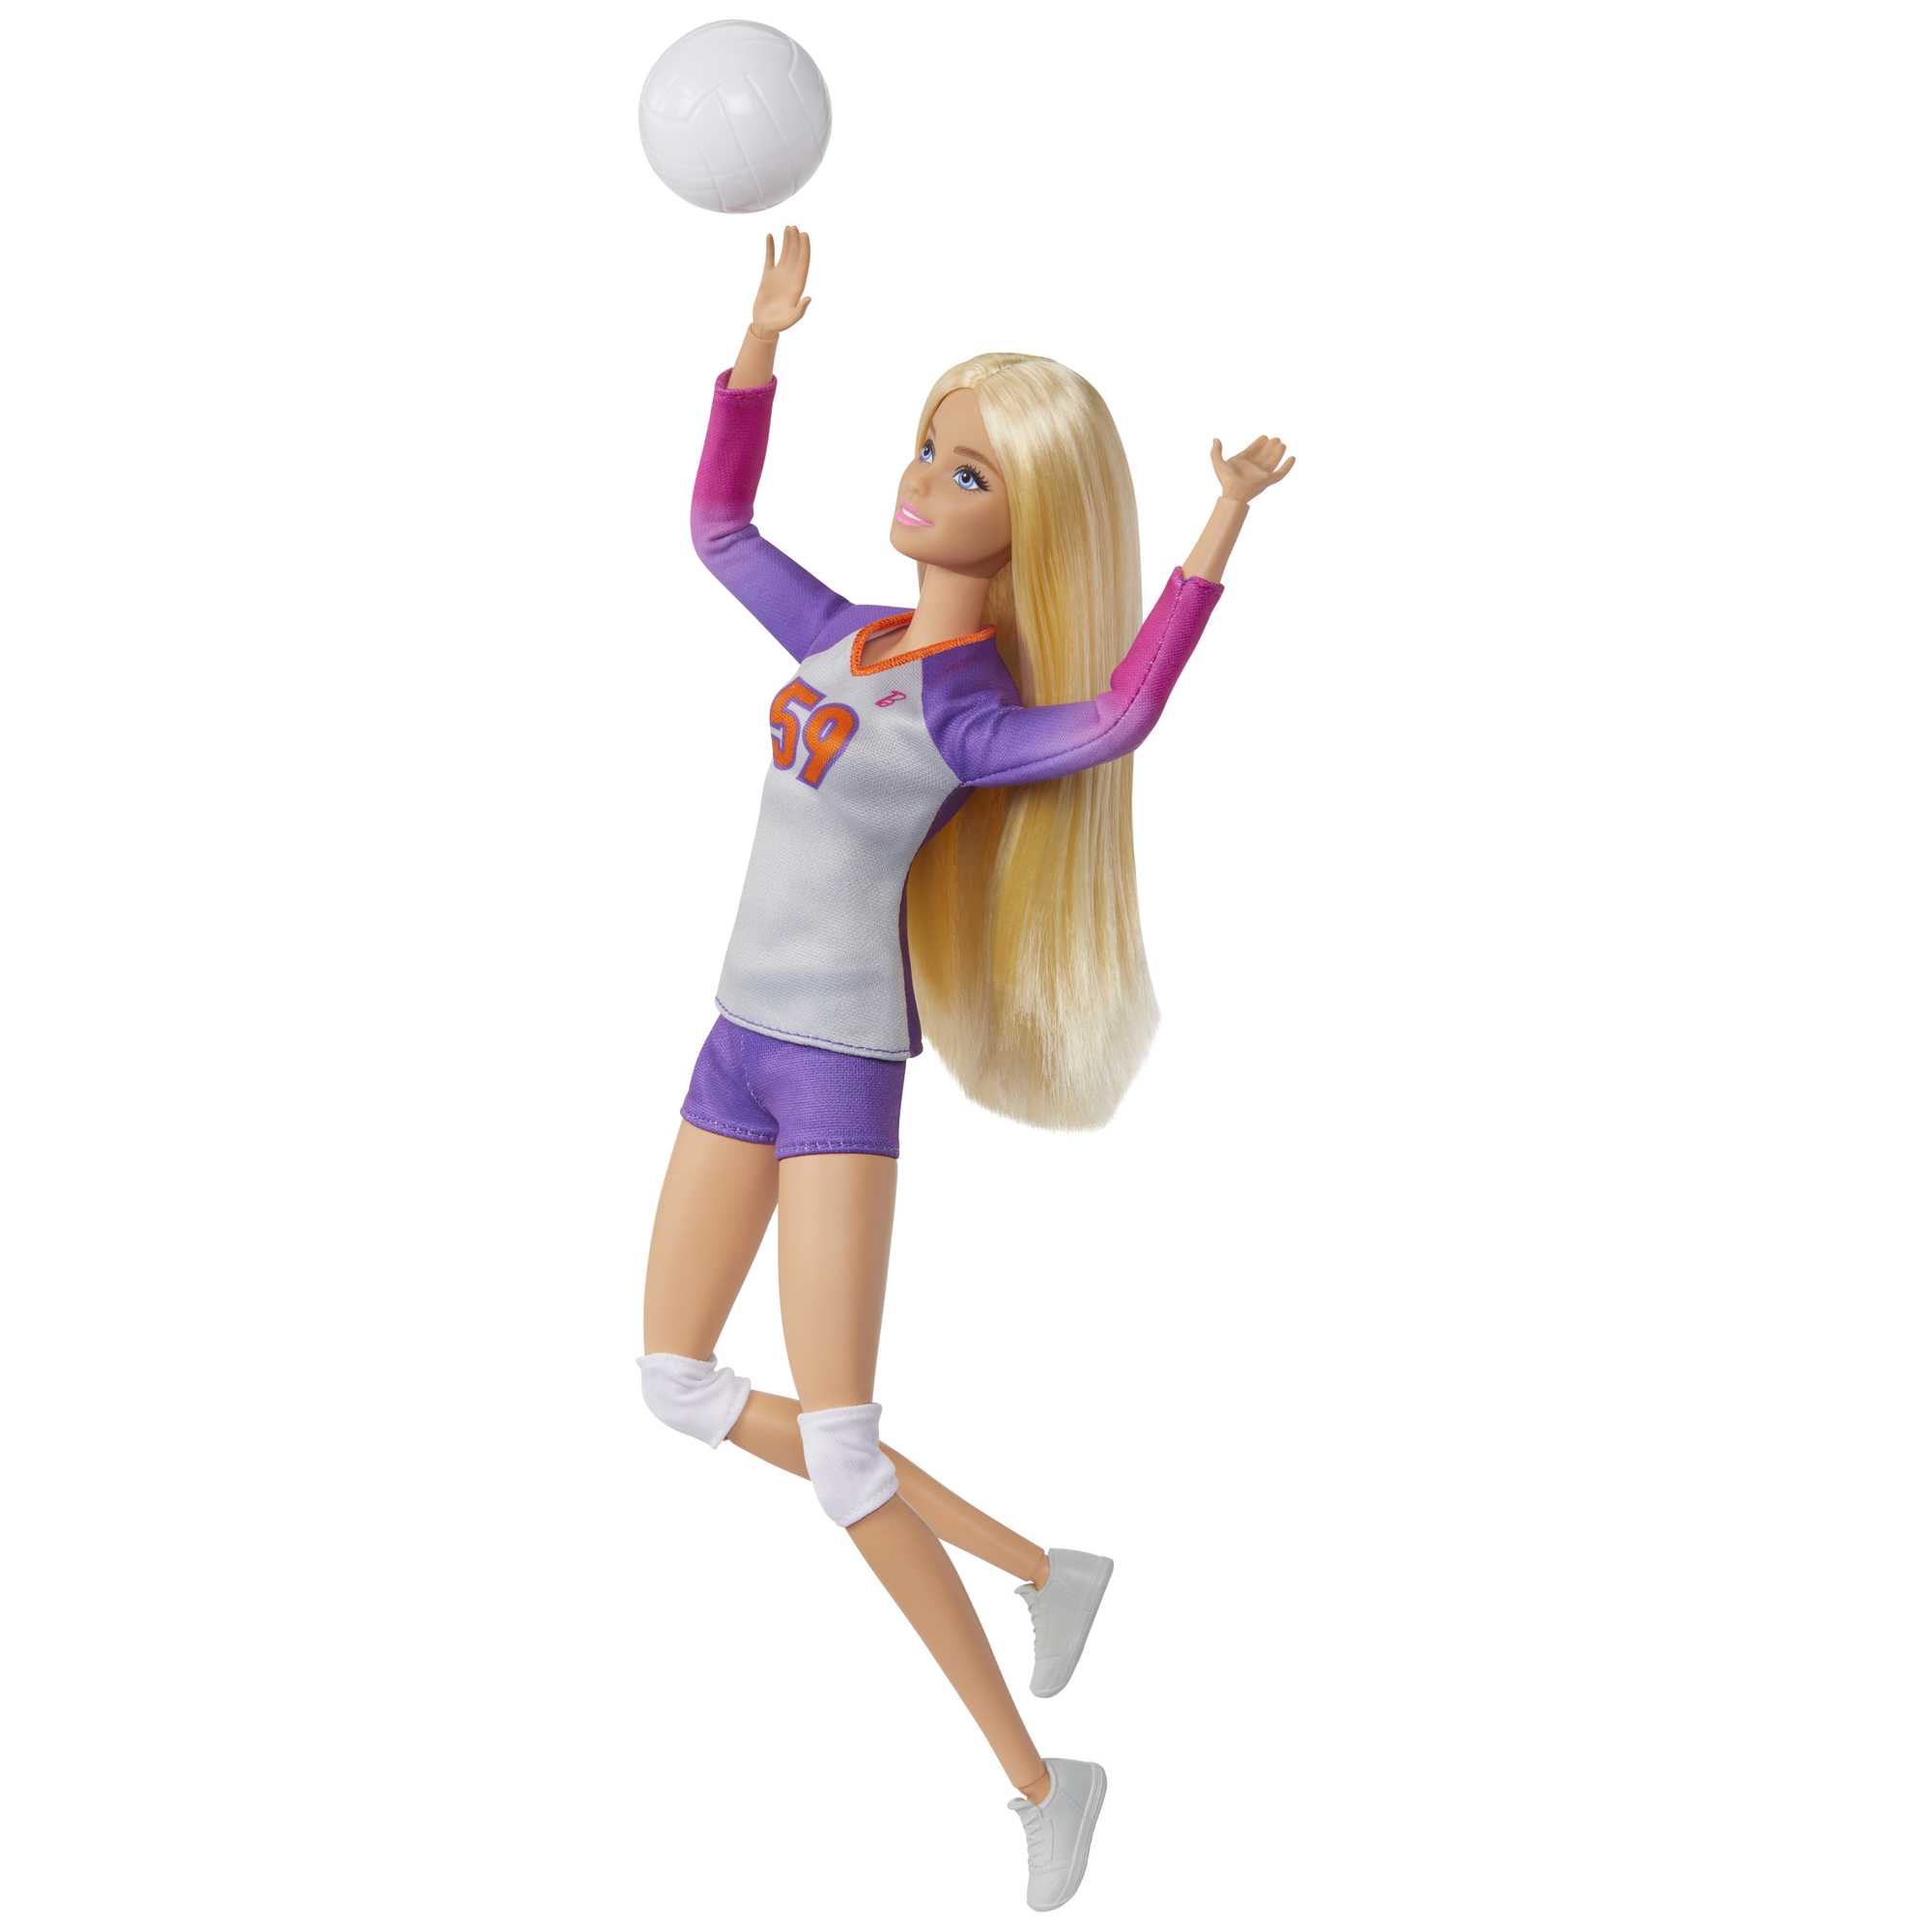 Barbie Made to Move Career Volleyball Player Doll